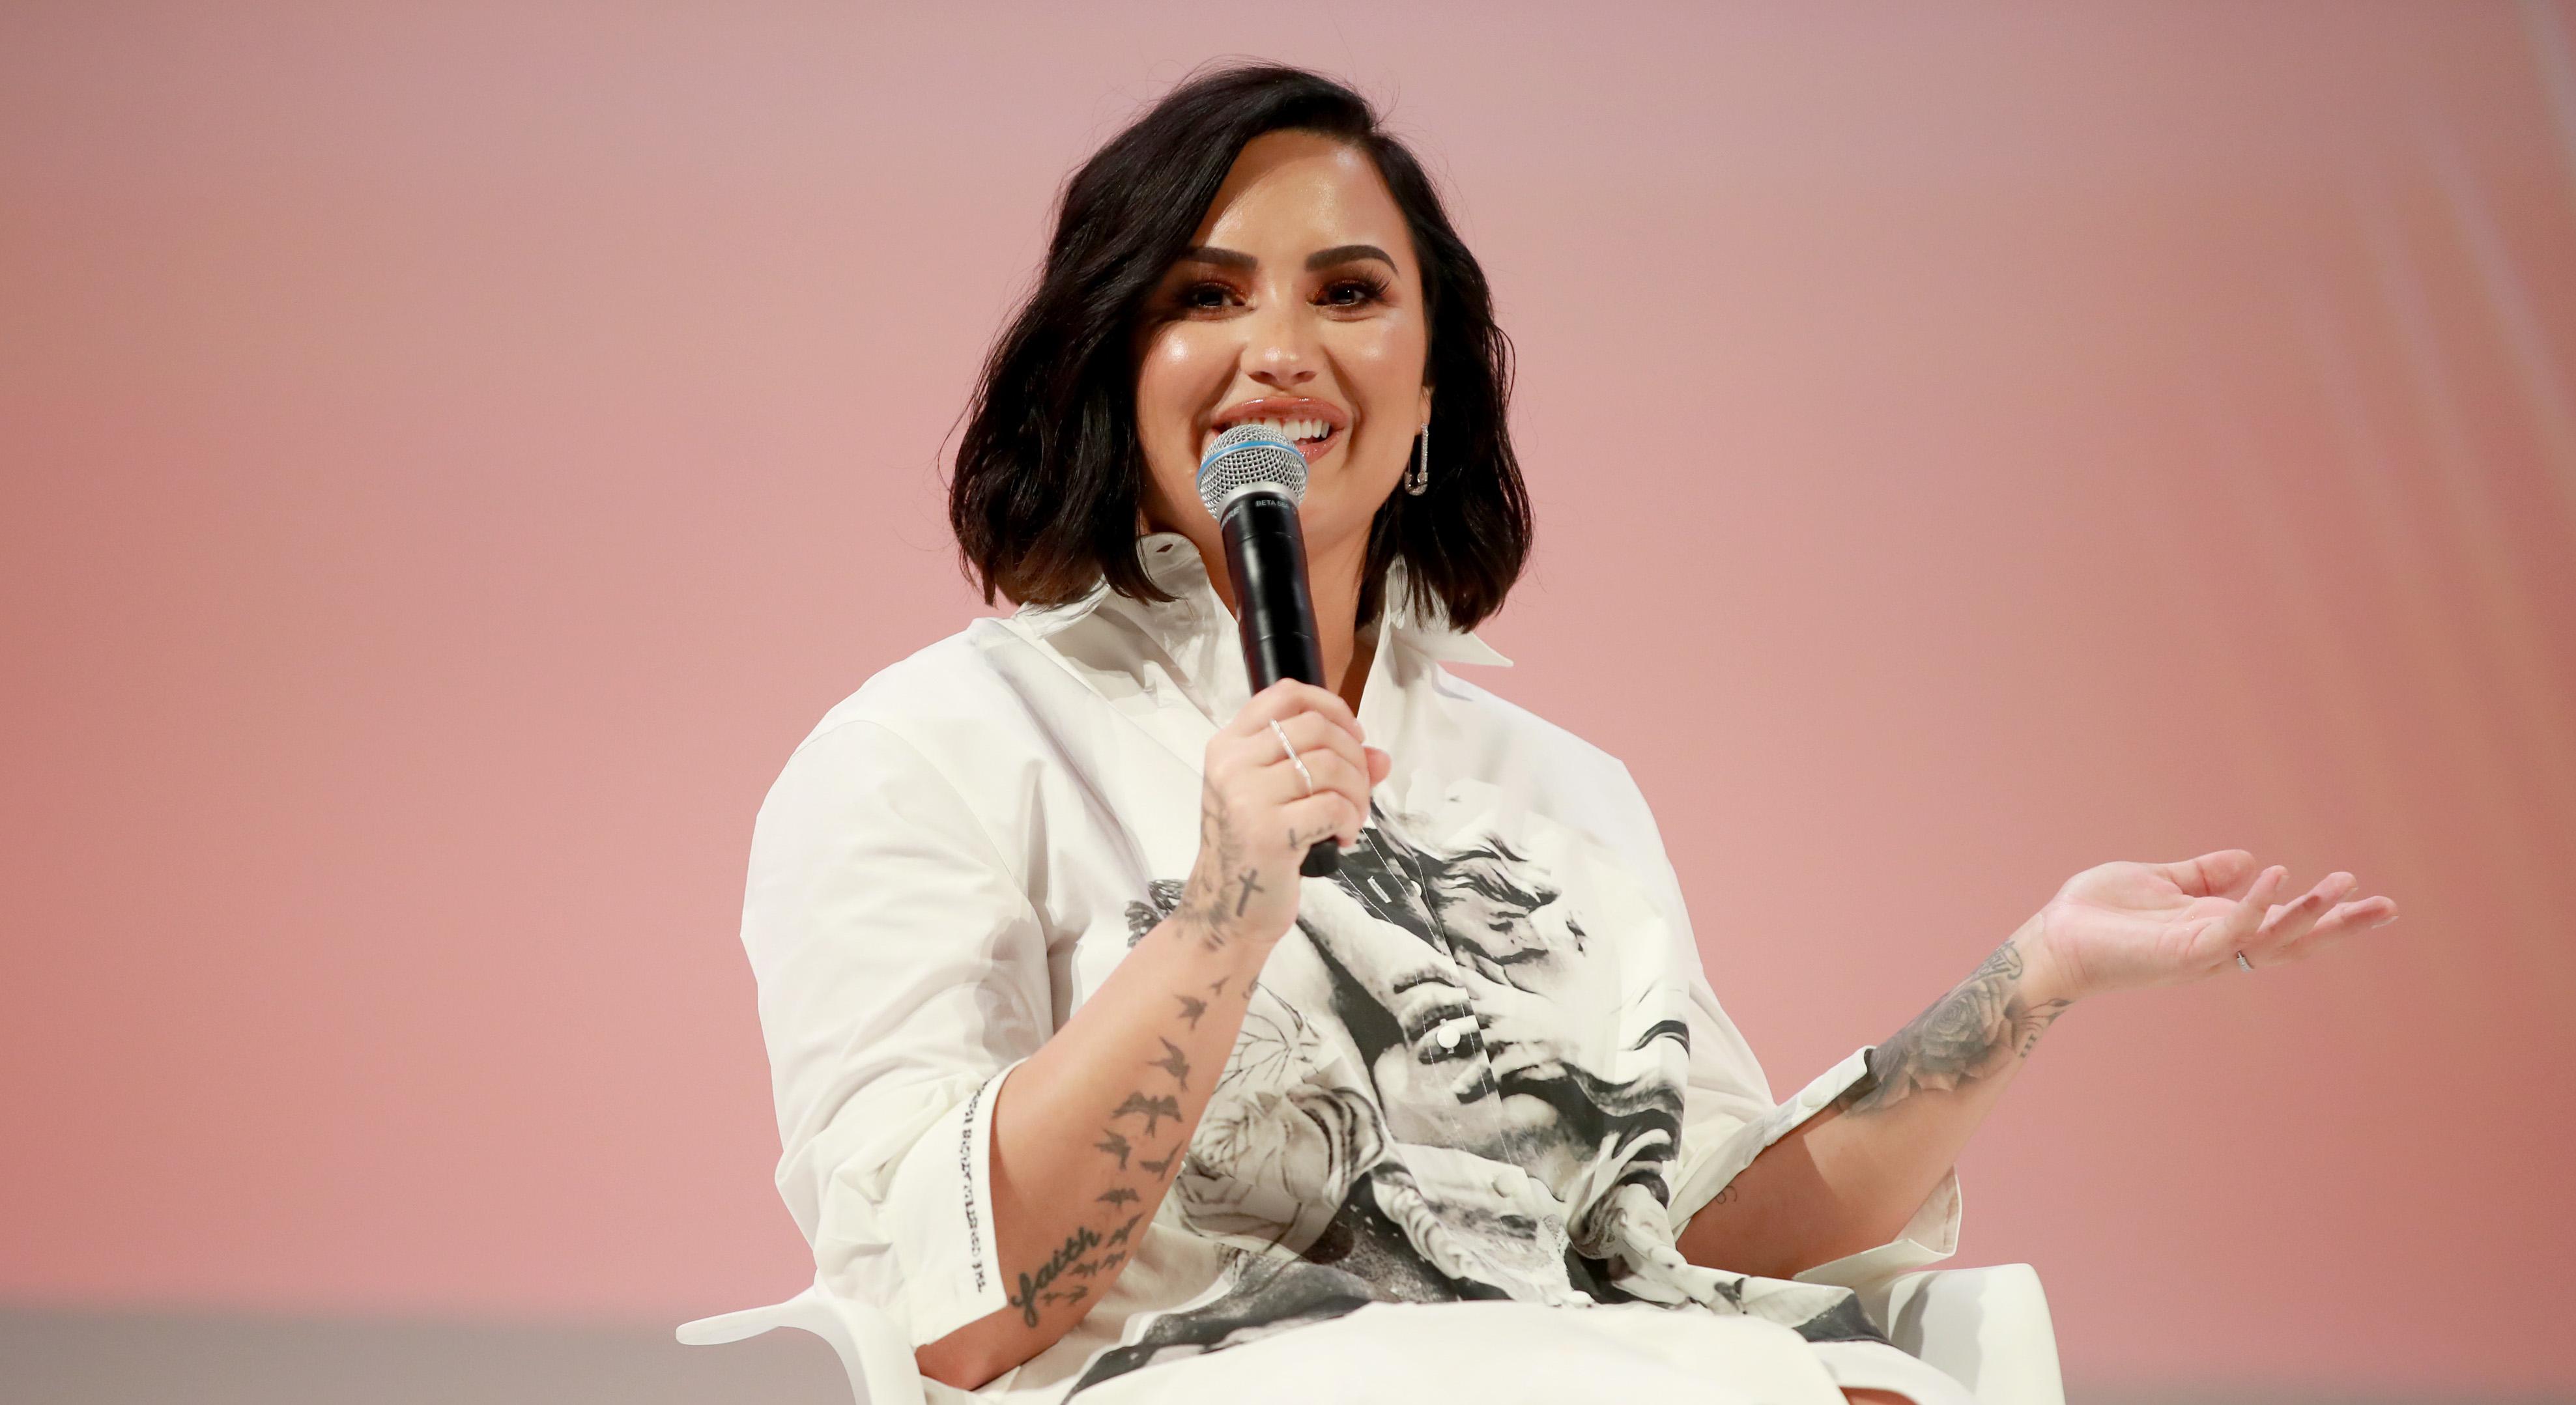 How Demi Lovato's Tattoos Express her Strength and Struggles